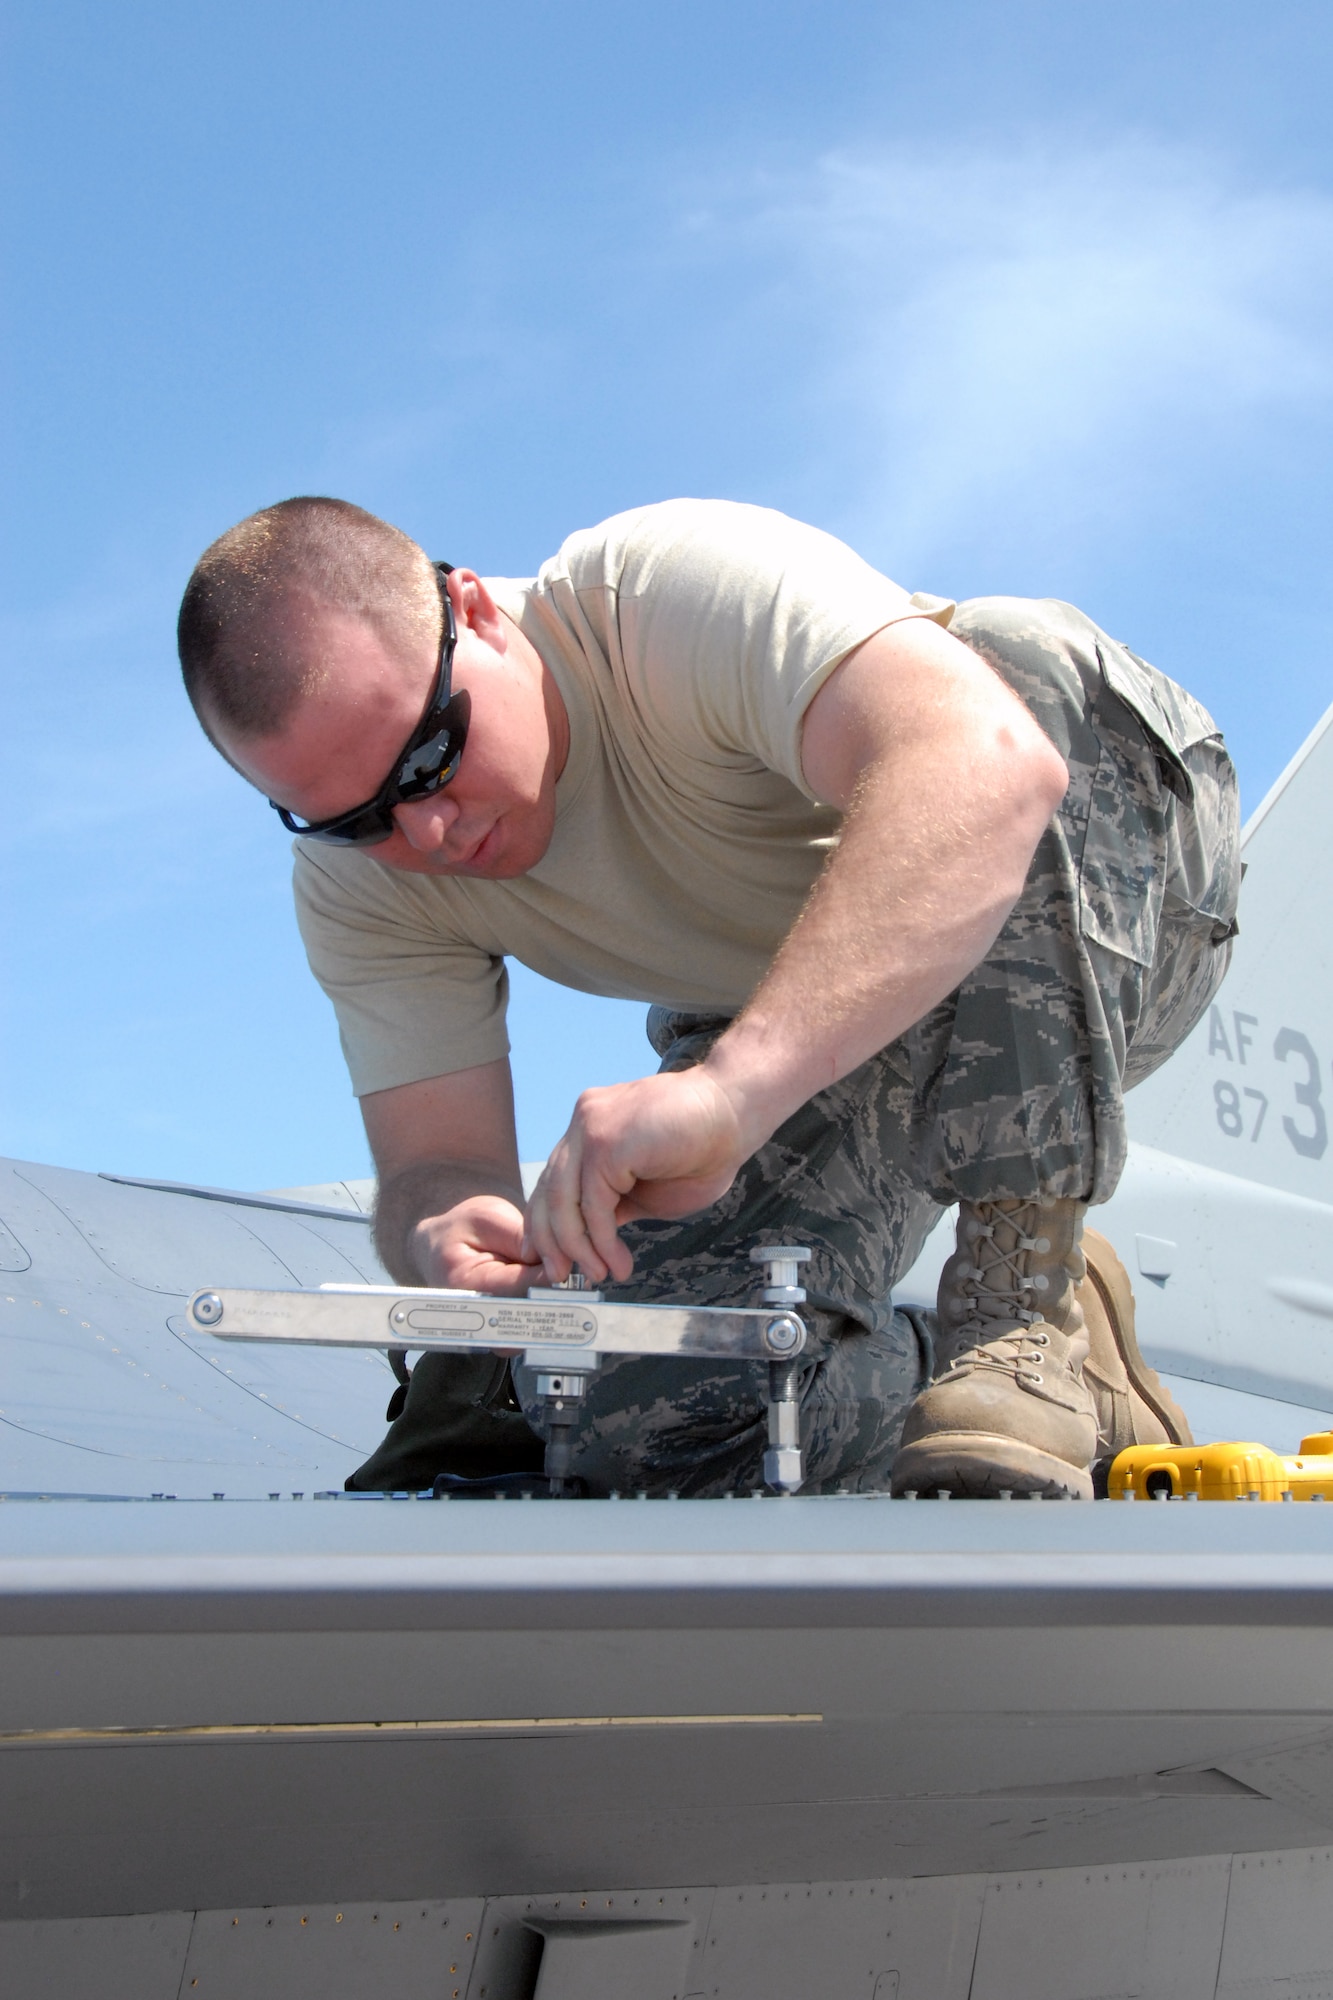 Airman 1st Class Jacob Lehr, a member of the 115 th Fighter Wing’s aircraft structural maintenance shop, works on an F-16C Fighting Falcon March 23, 2010, as part of two week air-to-air combat skills training mission at Naval Air Station Key West, Fla.   Close to 145 Airmen of the 115th Fighter Wing in Madison, Wis., spent approximately two weeks at NAS, gaining valuable training as their F-16 Falcons sparred against Navy F-18 Super Hornets and F-5 Tigers here.  (U.S. Air Force photo by Airman 1st Class Ryan Roth, 115 FW/PA)